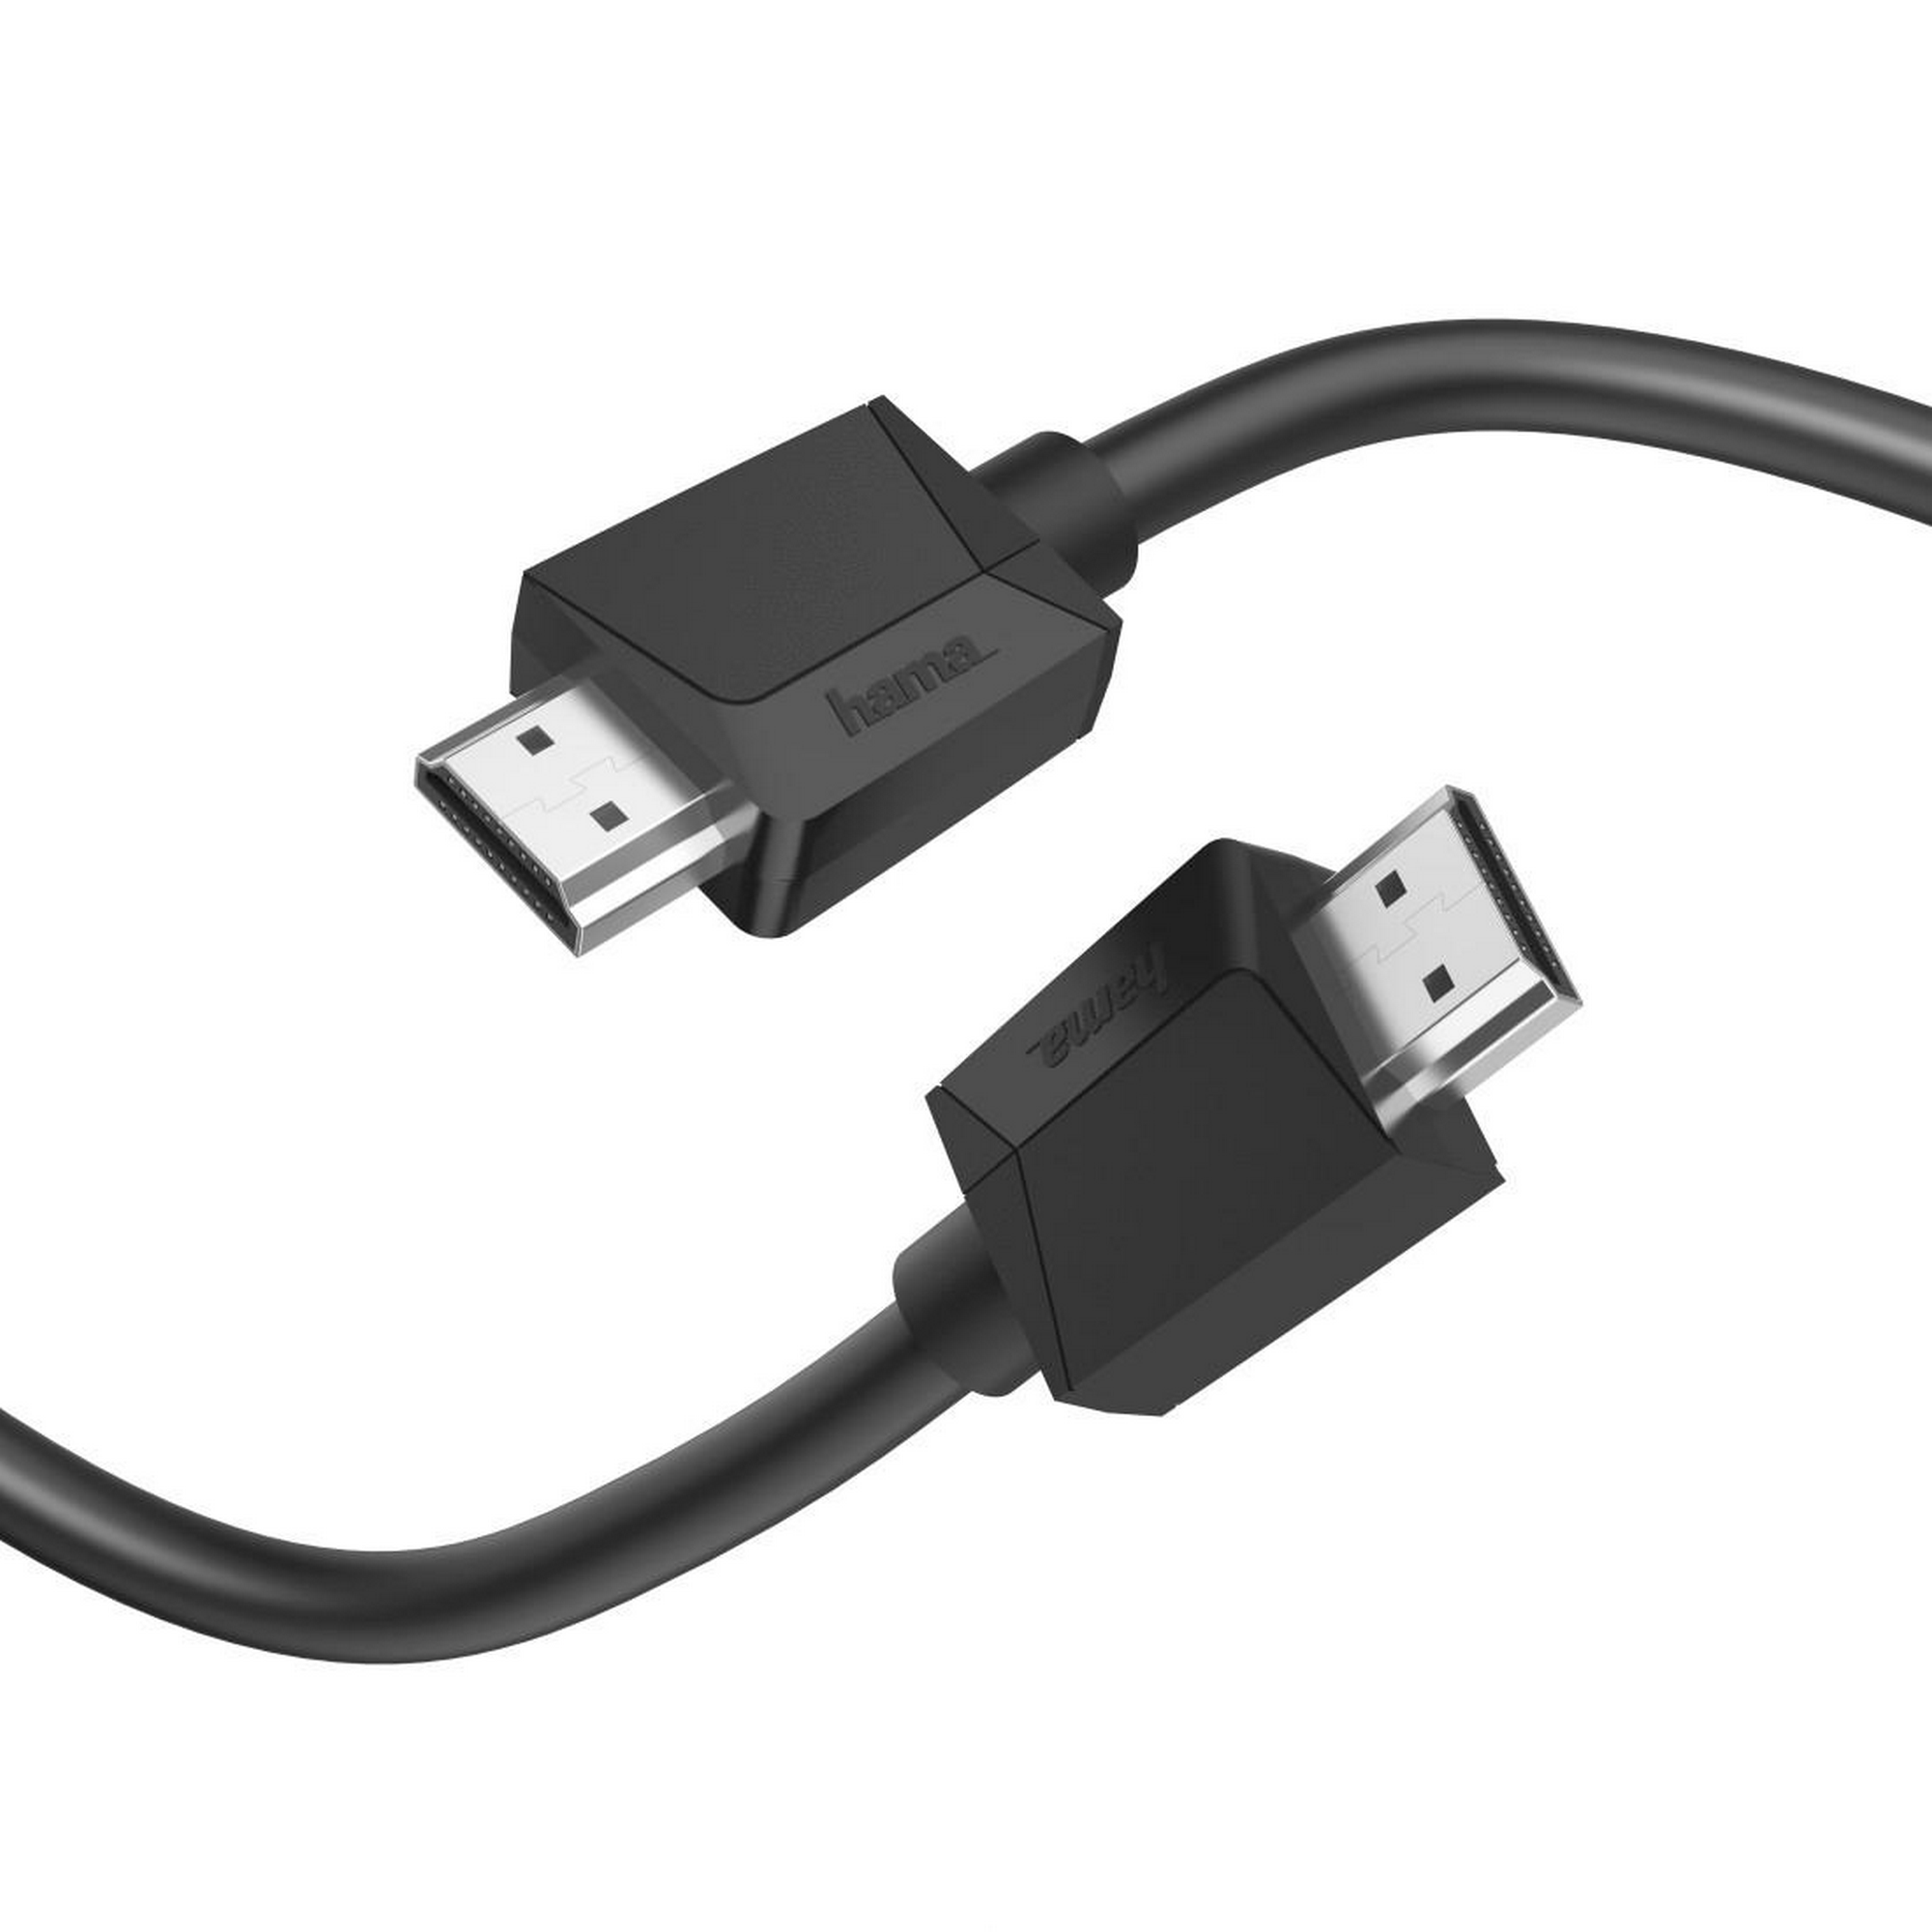 HDMI-Kabel 'Essential Line' High-Speed 4K Ethernet schwarz 3 m + product picture